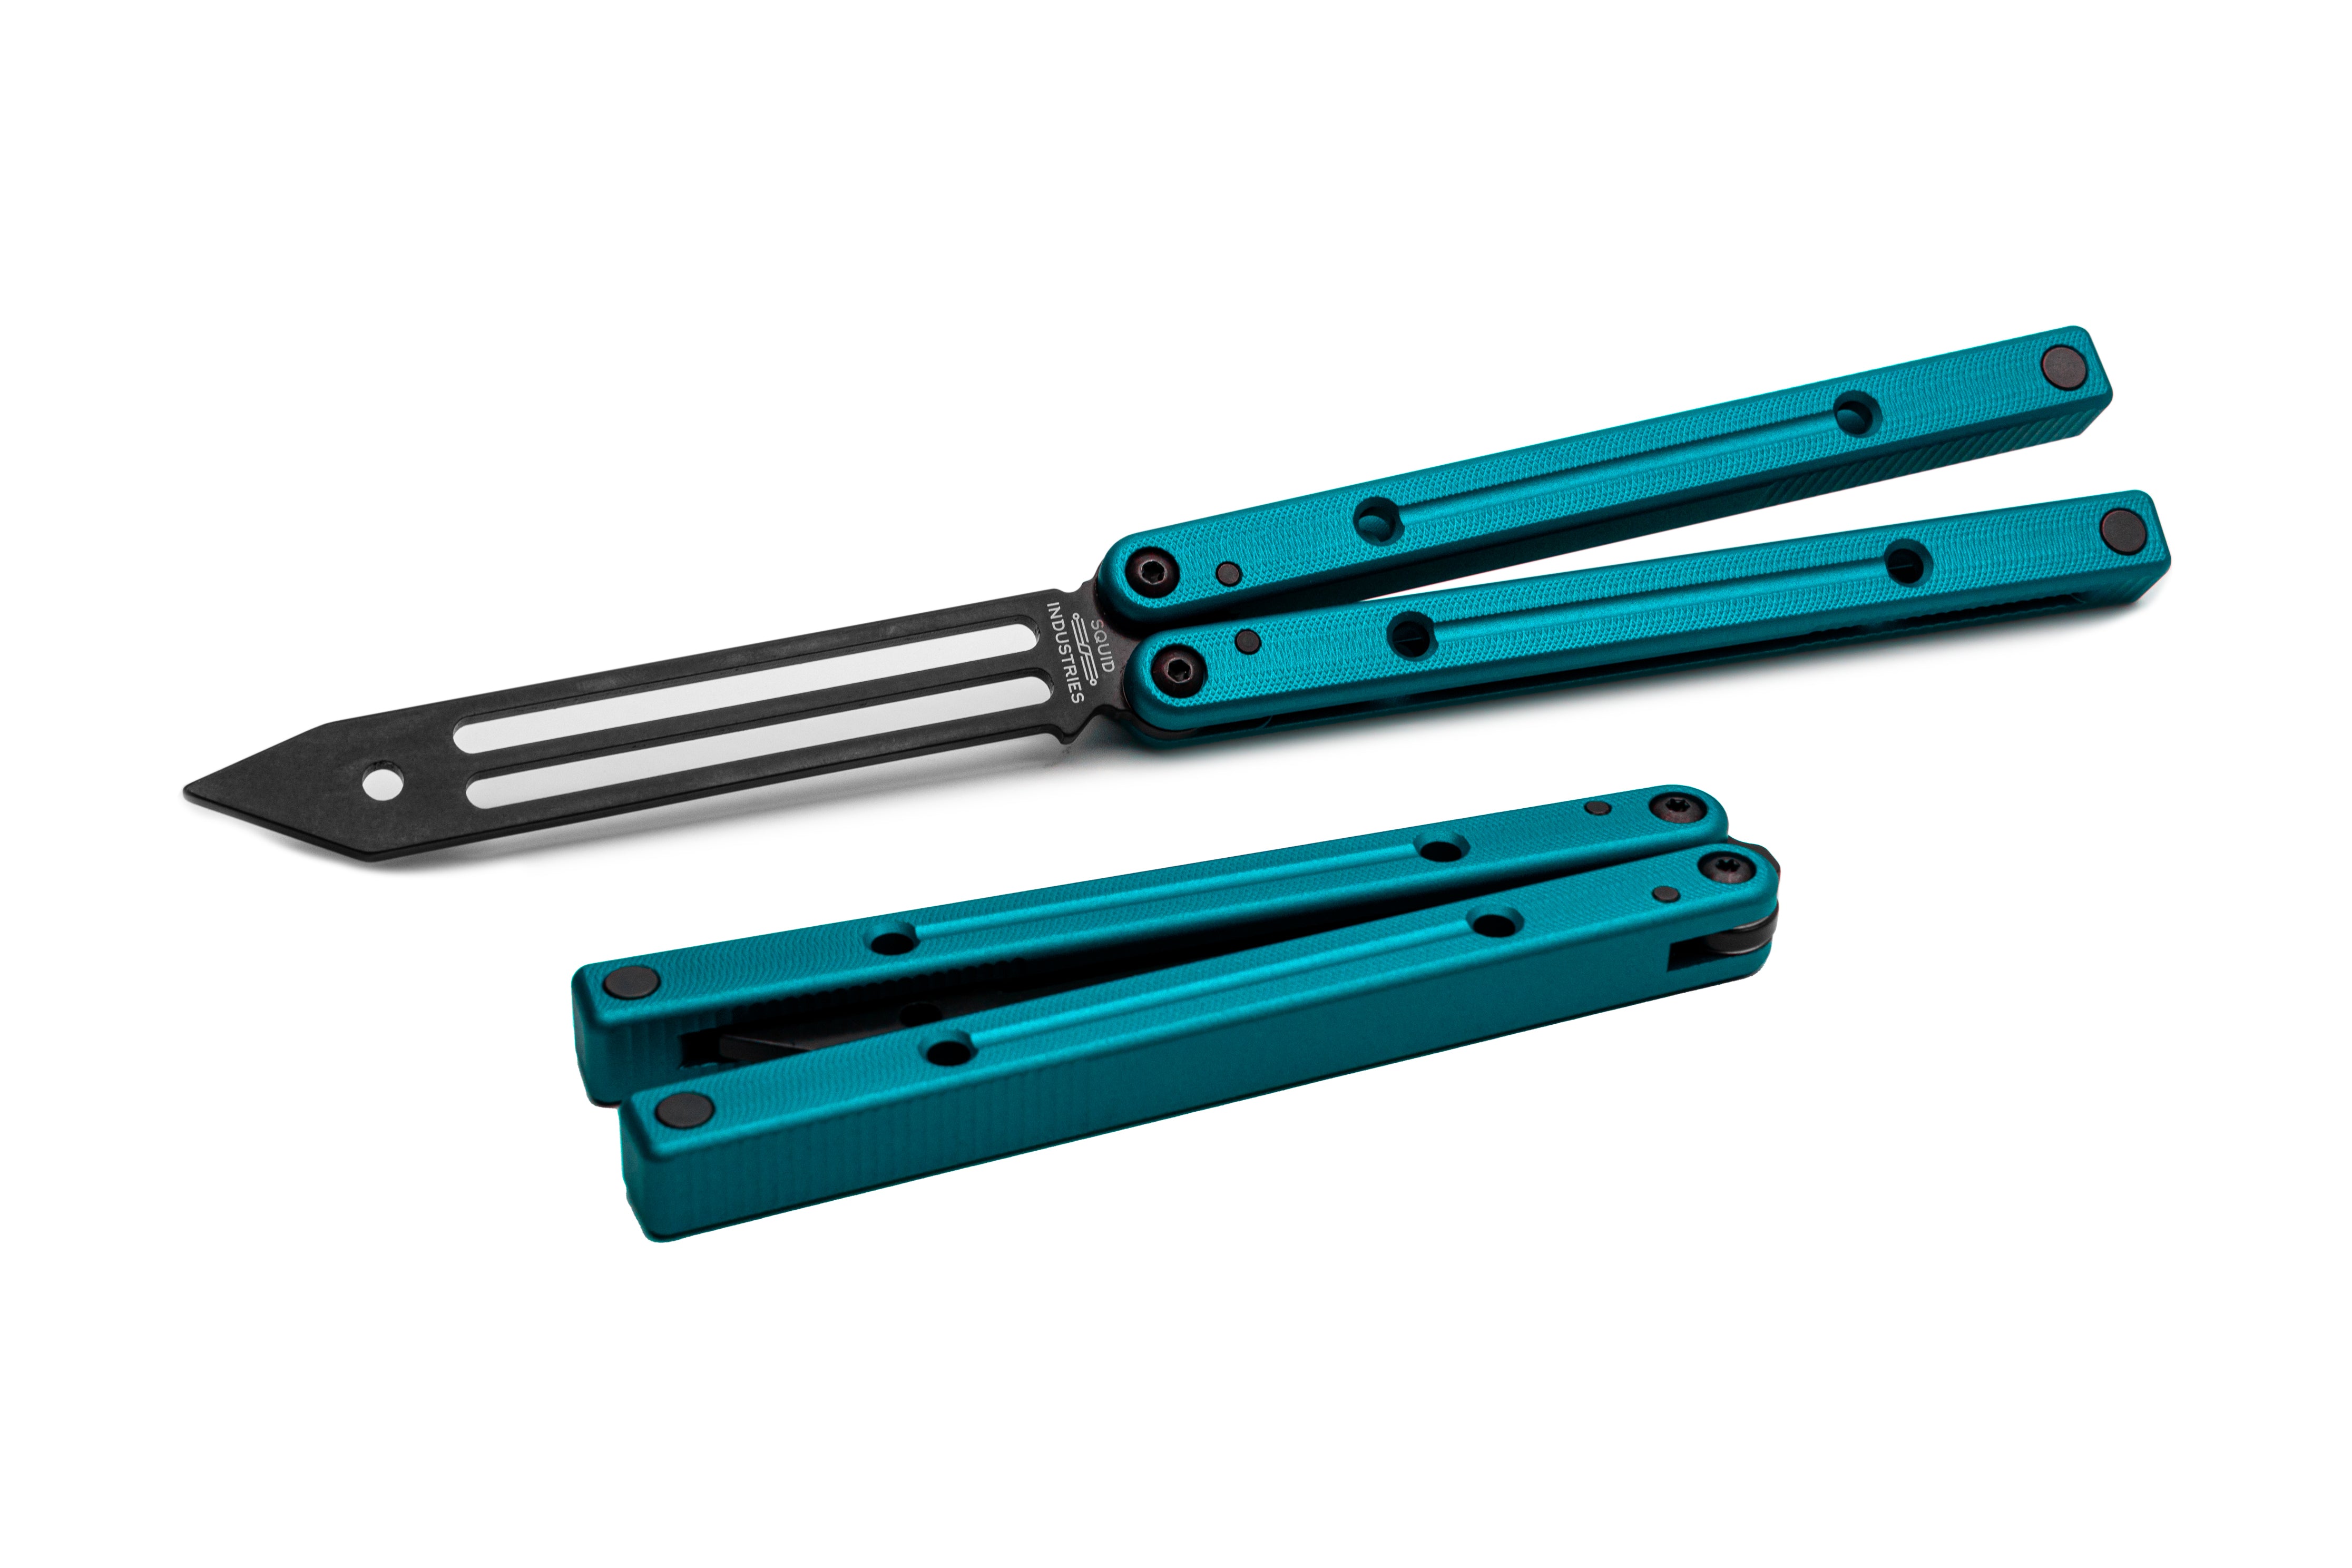 Squidtrainer V4 Balisong Butterfly Knife Trainer | Squid Industries